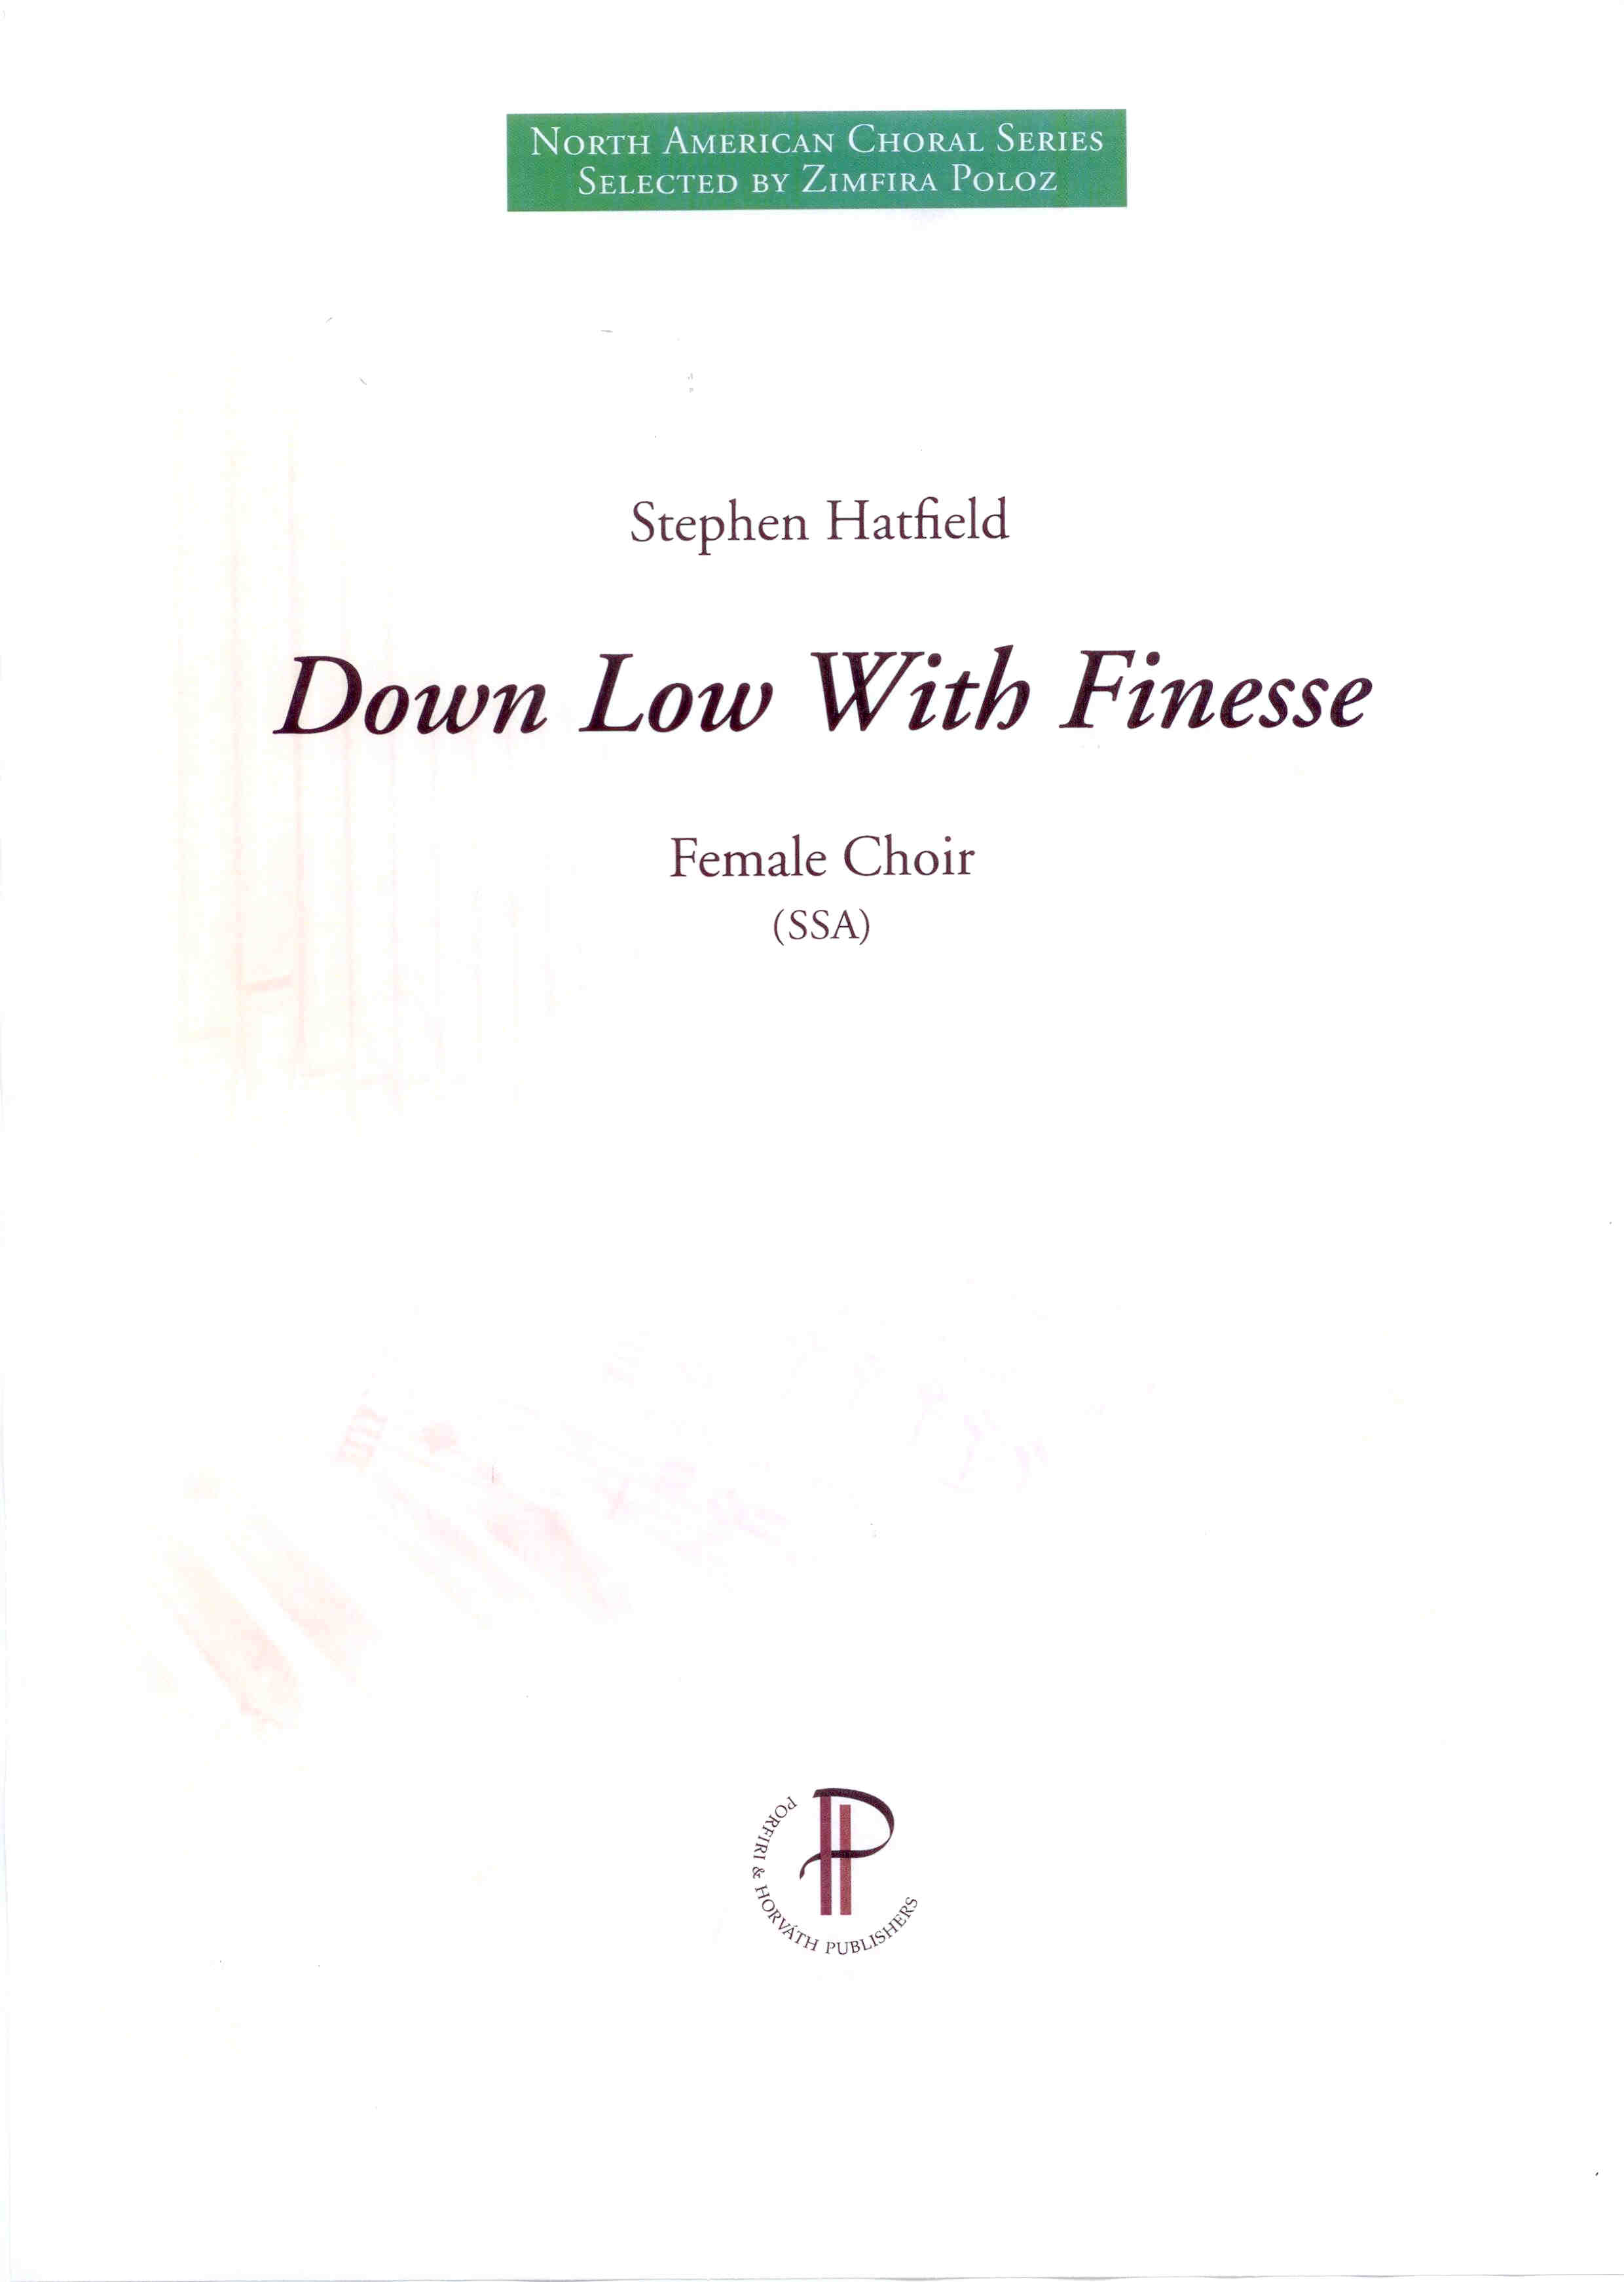 Down Low With Finesse - Show sample score